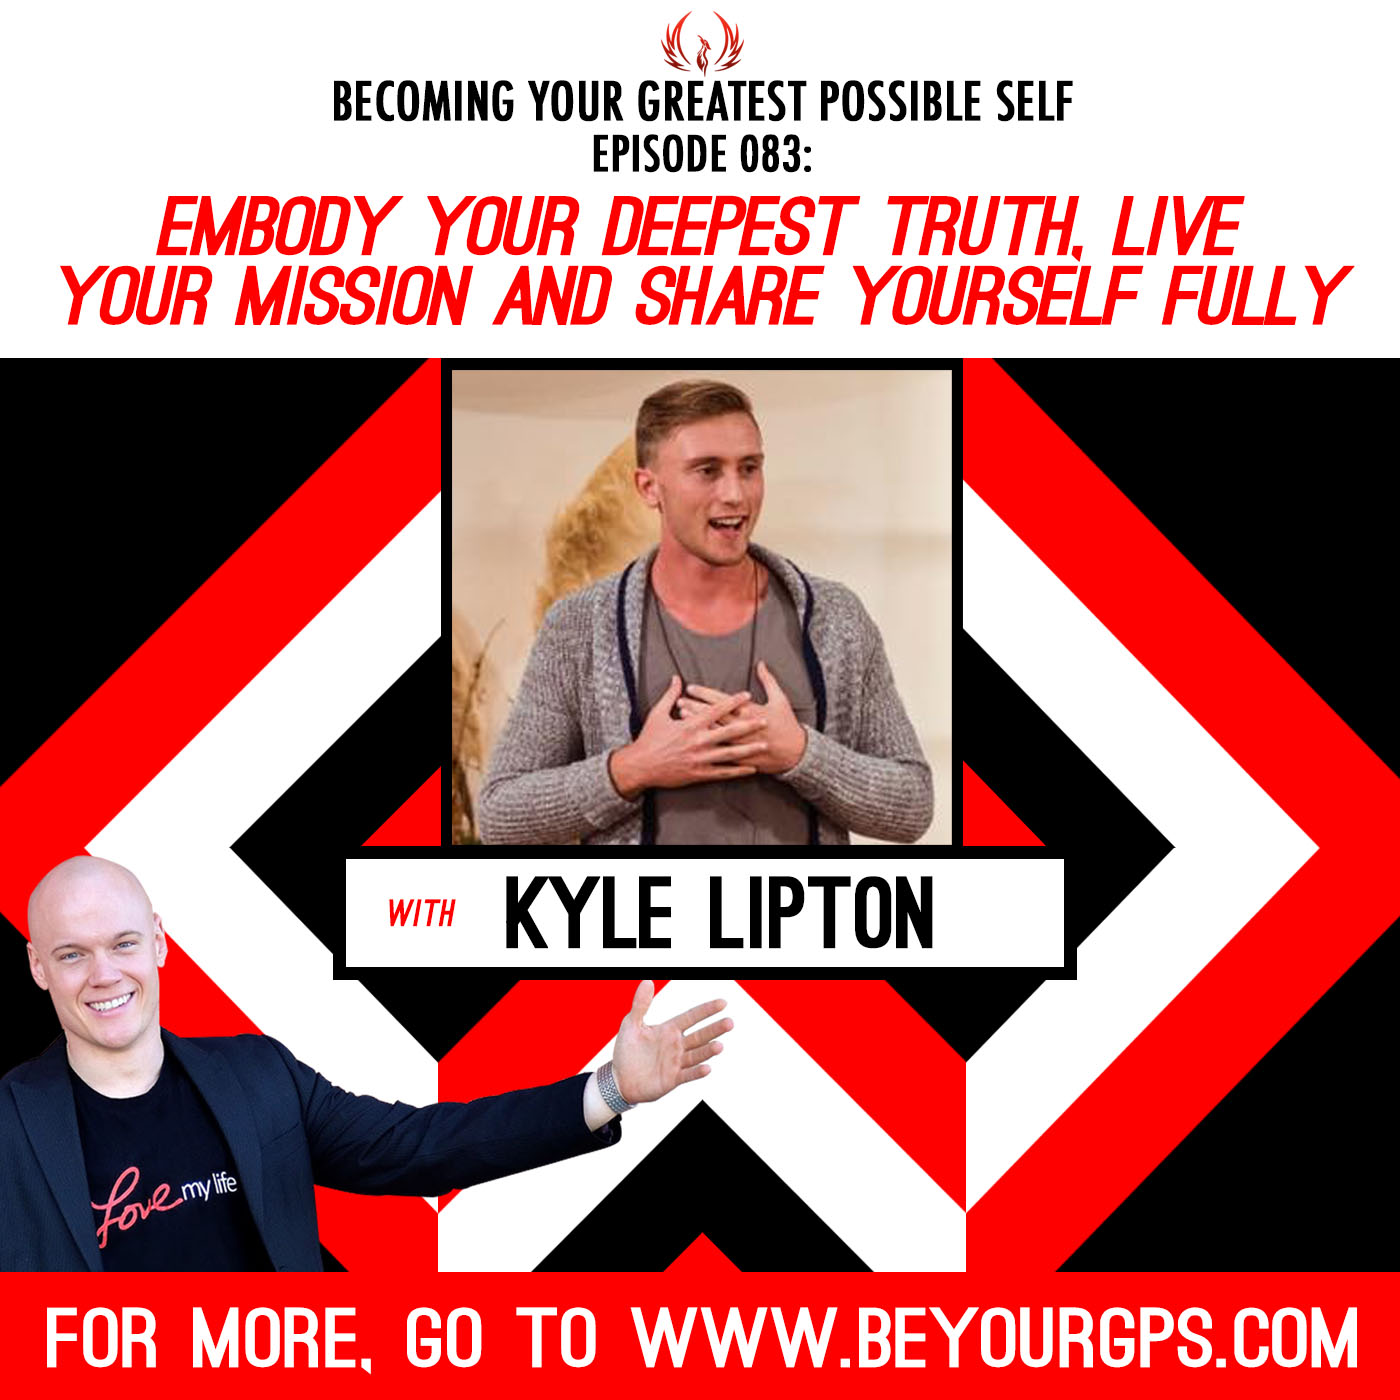 Embody Your Deepest Truth Live Your Mission and Share Yourself Fully with Kyle Lipton